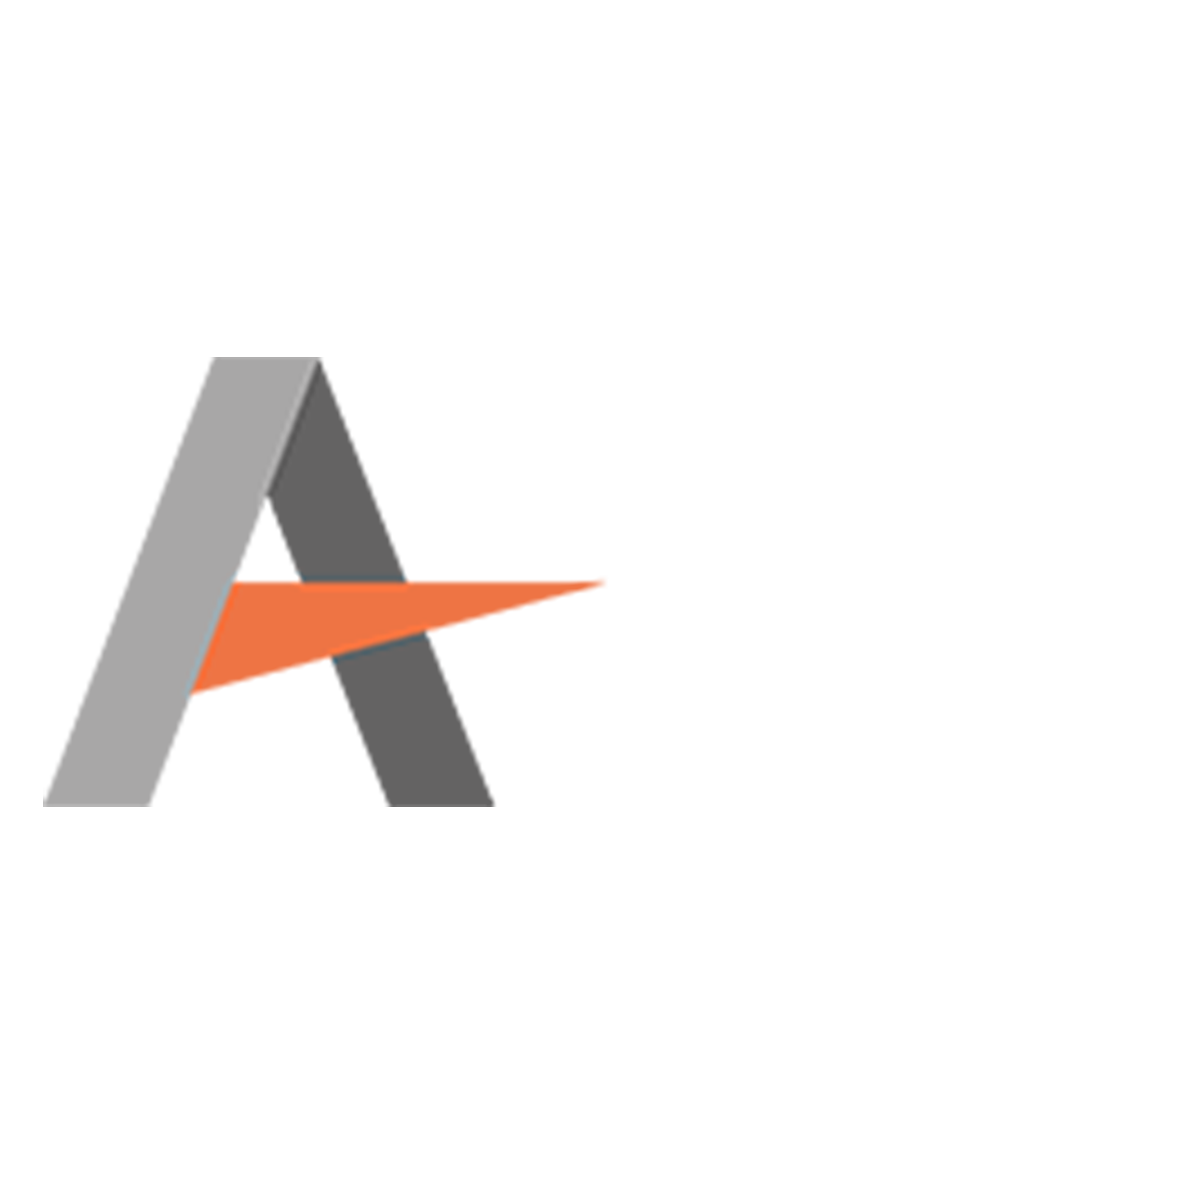 Archer Hotel Capital logo - HoCoSo Clients